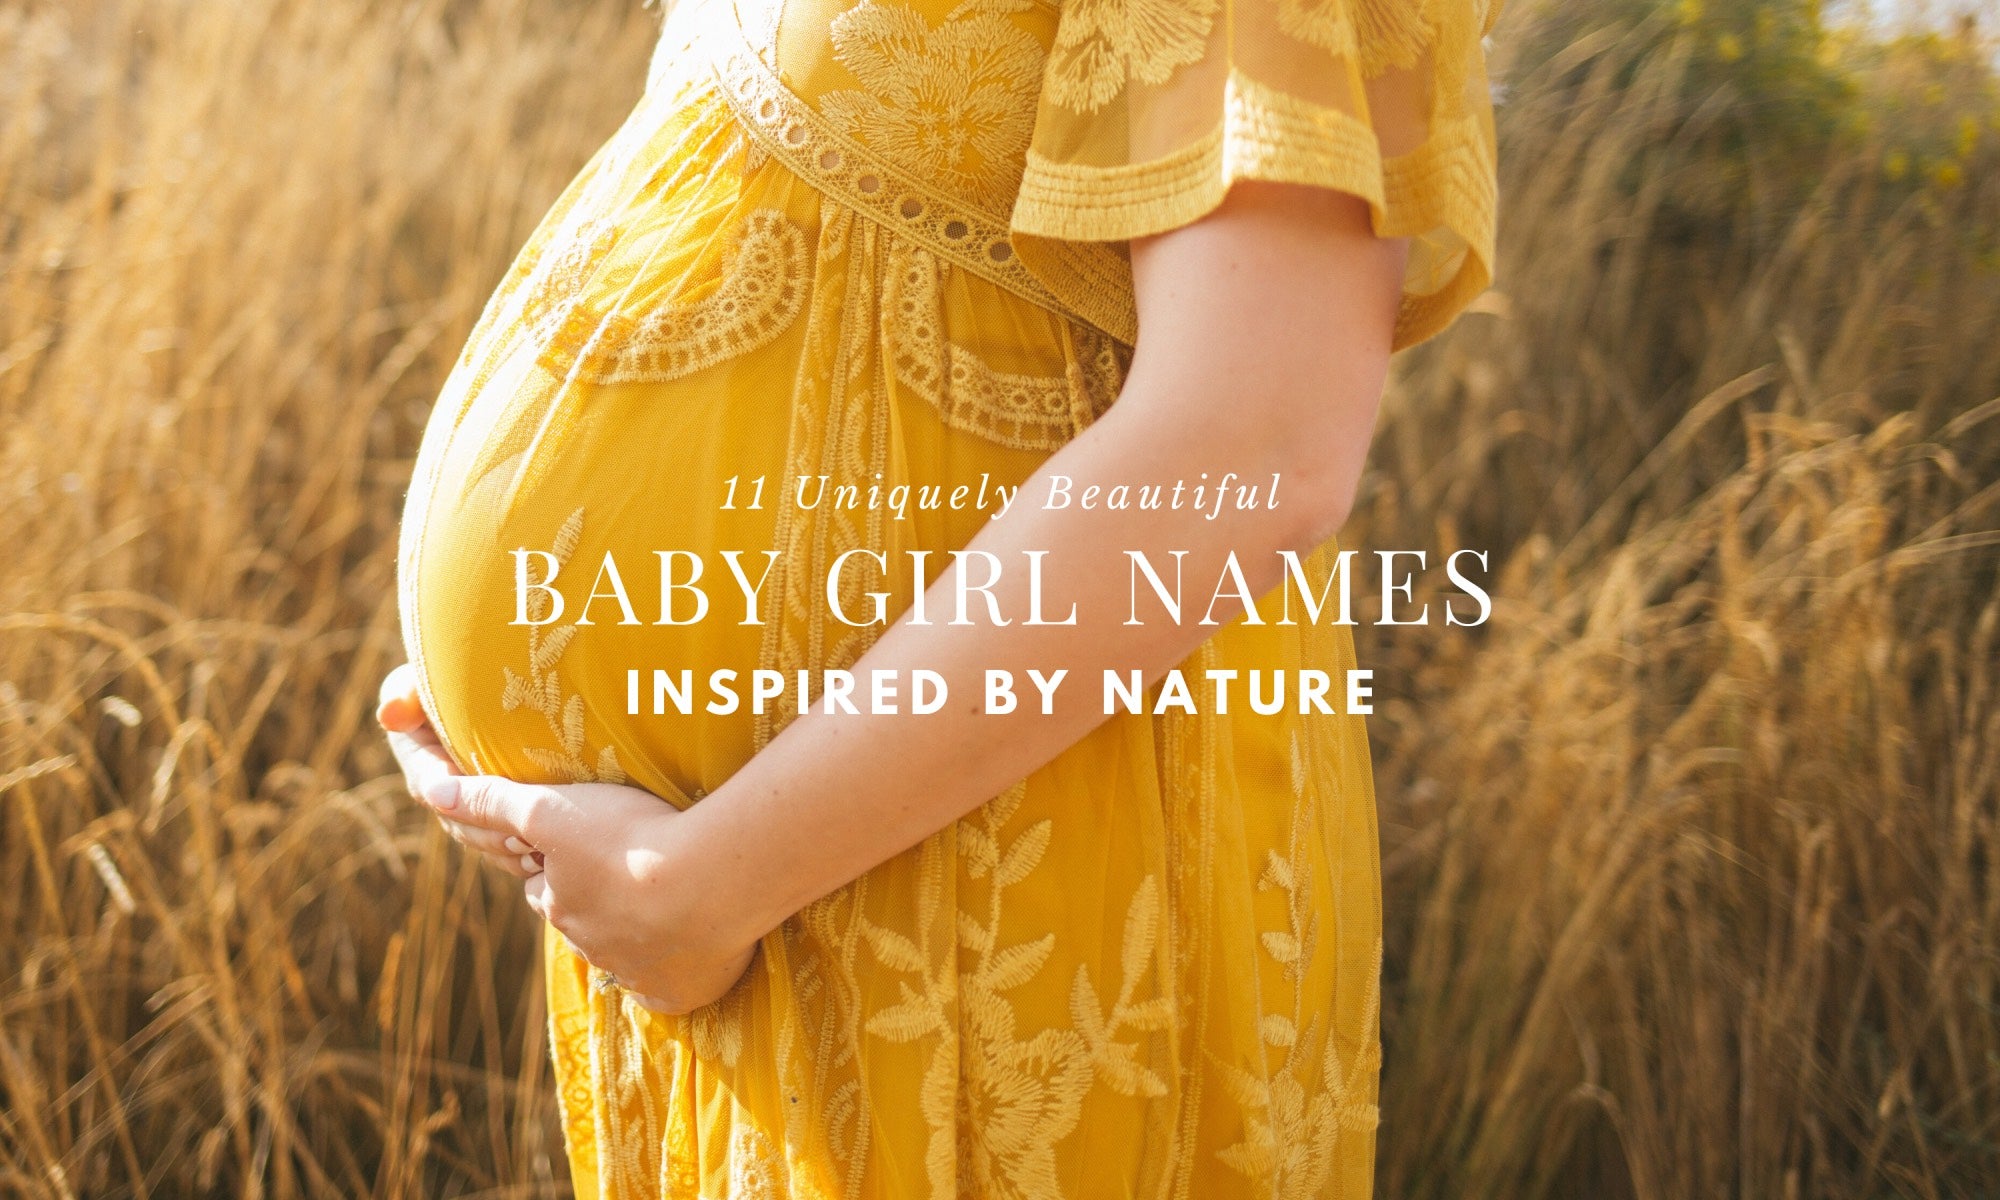 Our Top 11 Beautiful Nature-Inspired Baby Girls' Names (You May not Have Thought of)